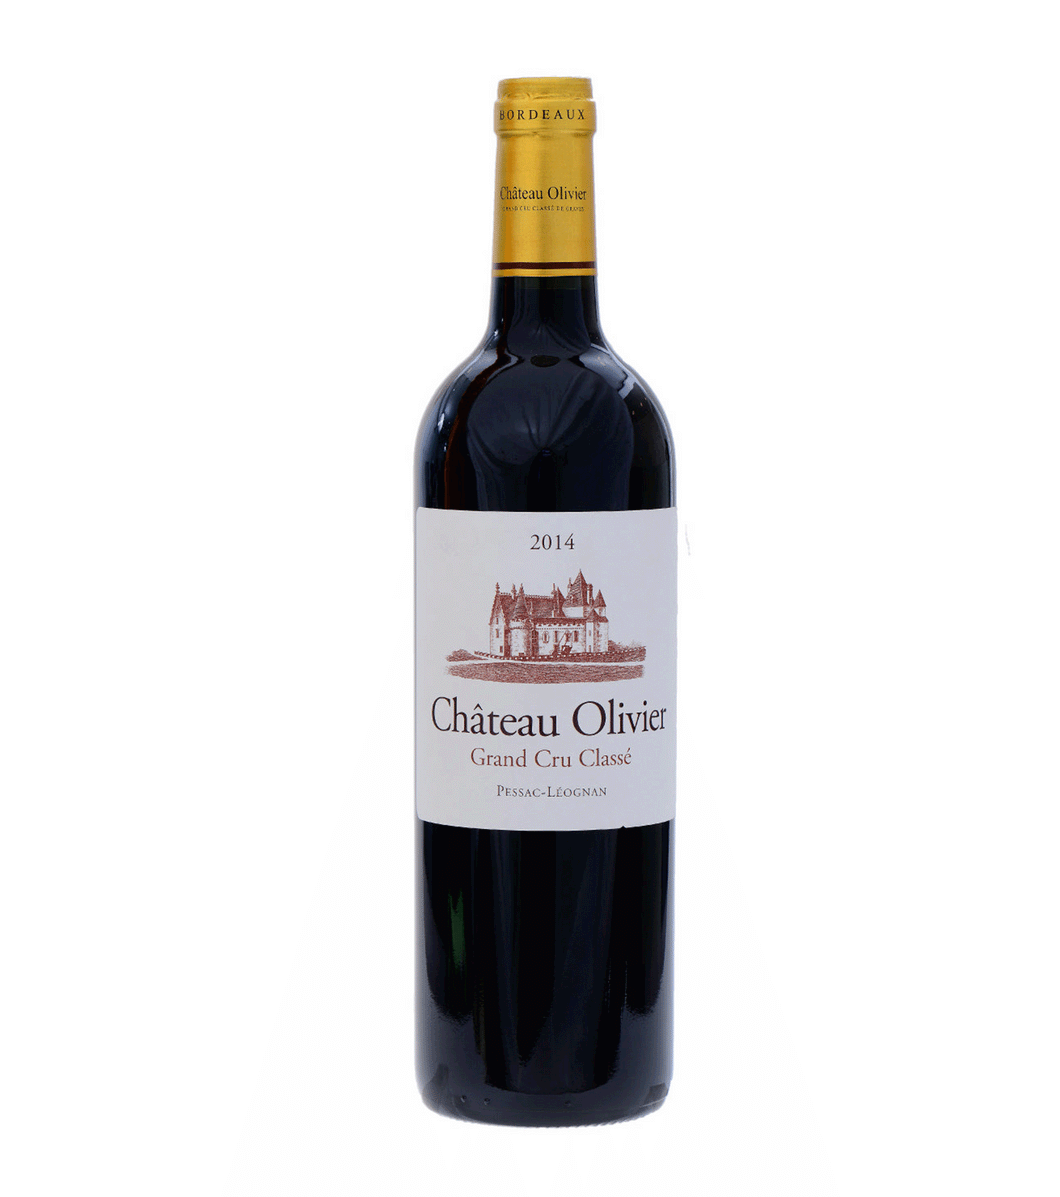 Chateau Olivier 2014